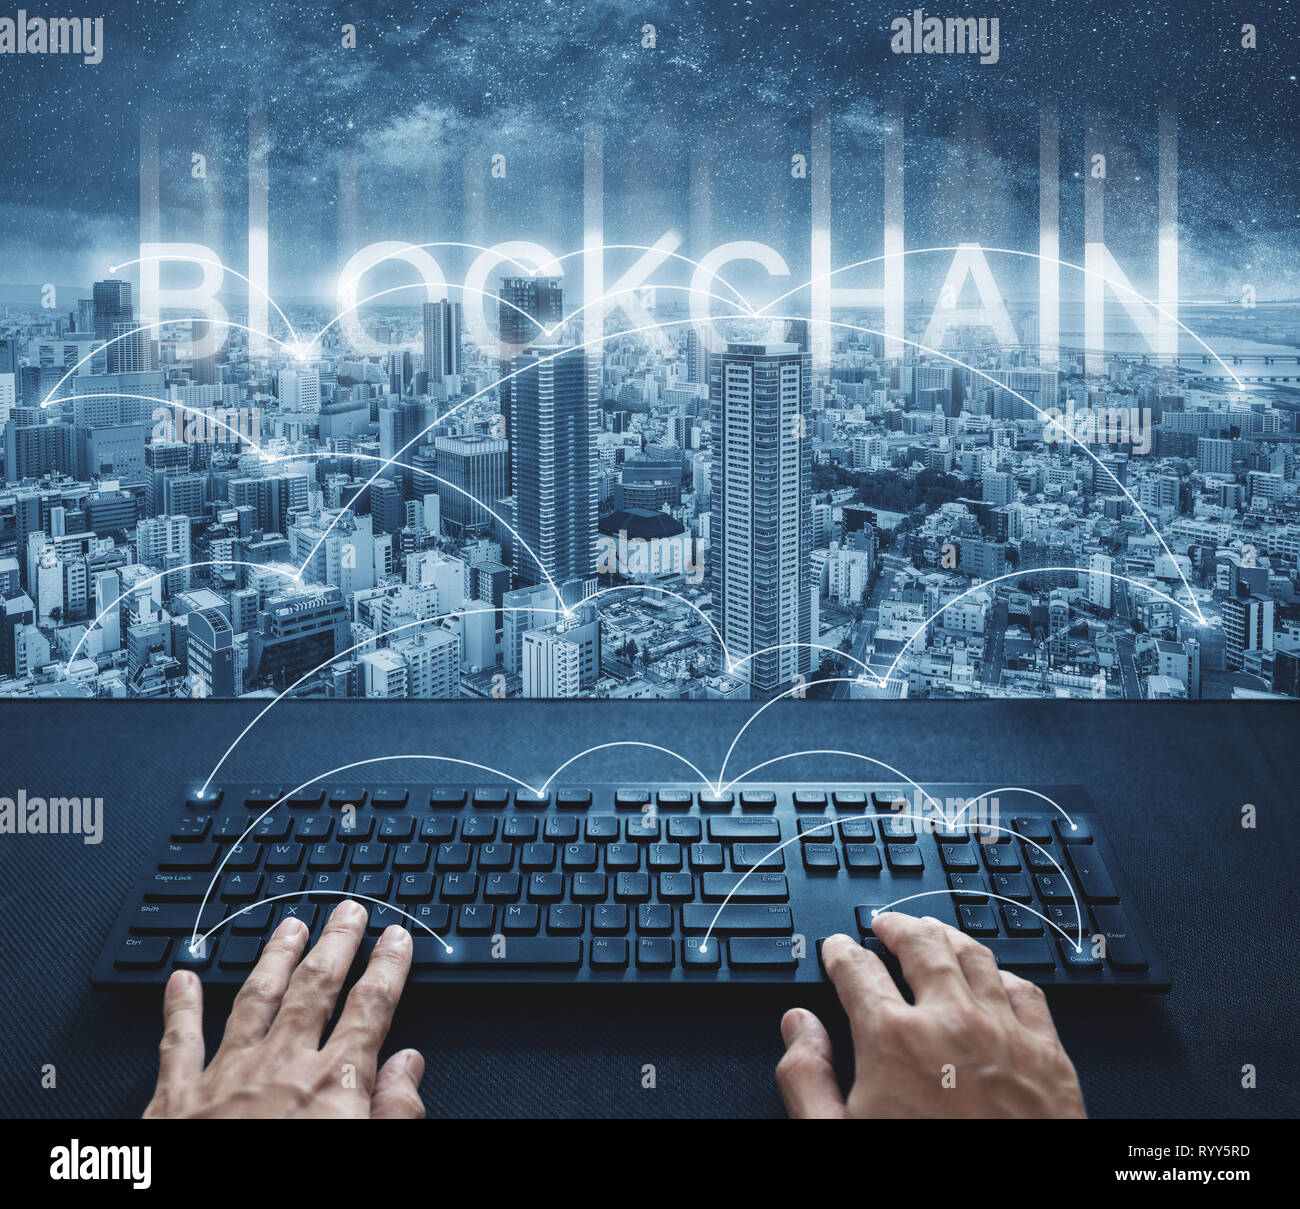 Blockchain technology, Hand typing computer keyboard and city network Stock Photo